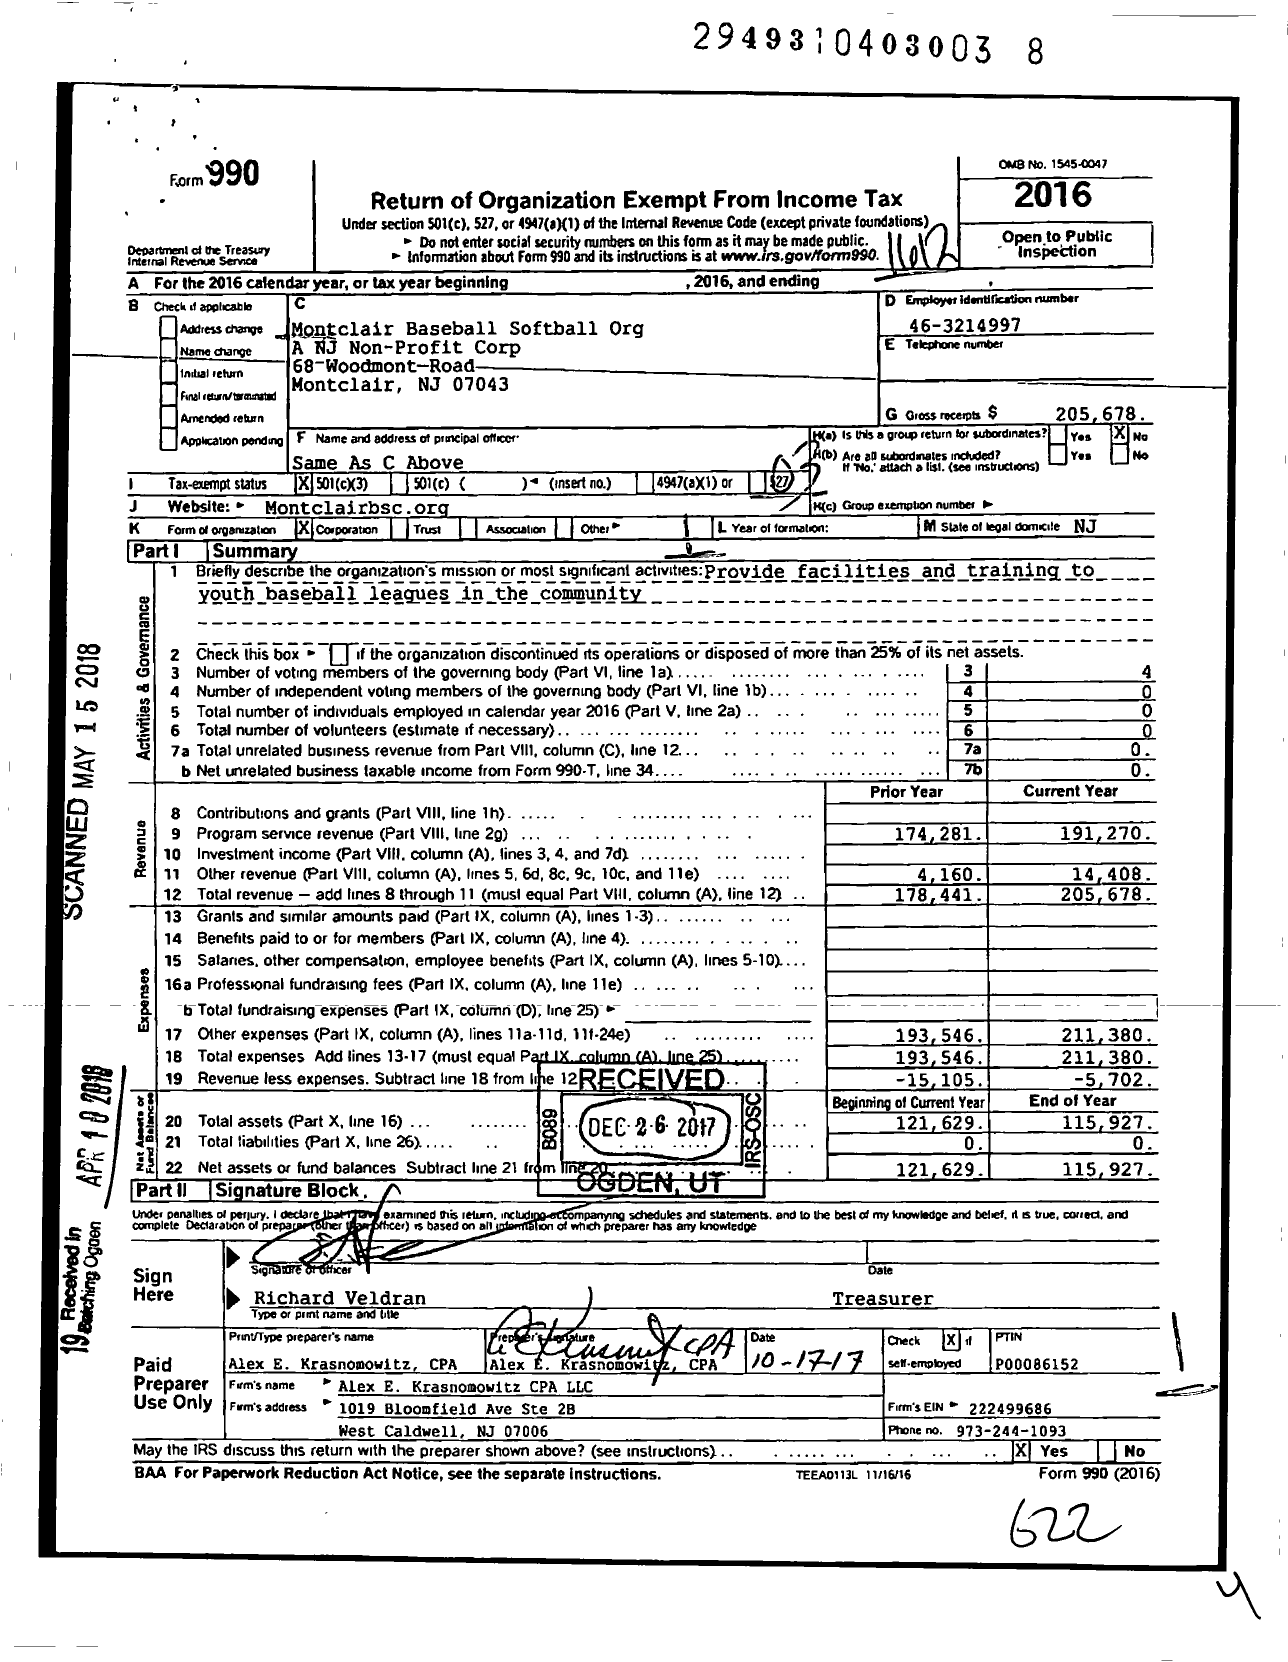 Image of first page of 2016 Form 990 for Montclair Baseball Softball Org A NJ Non-Profit Corp